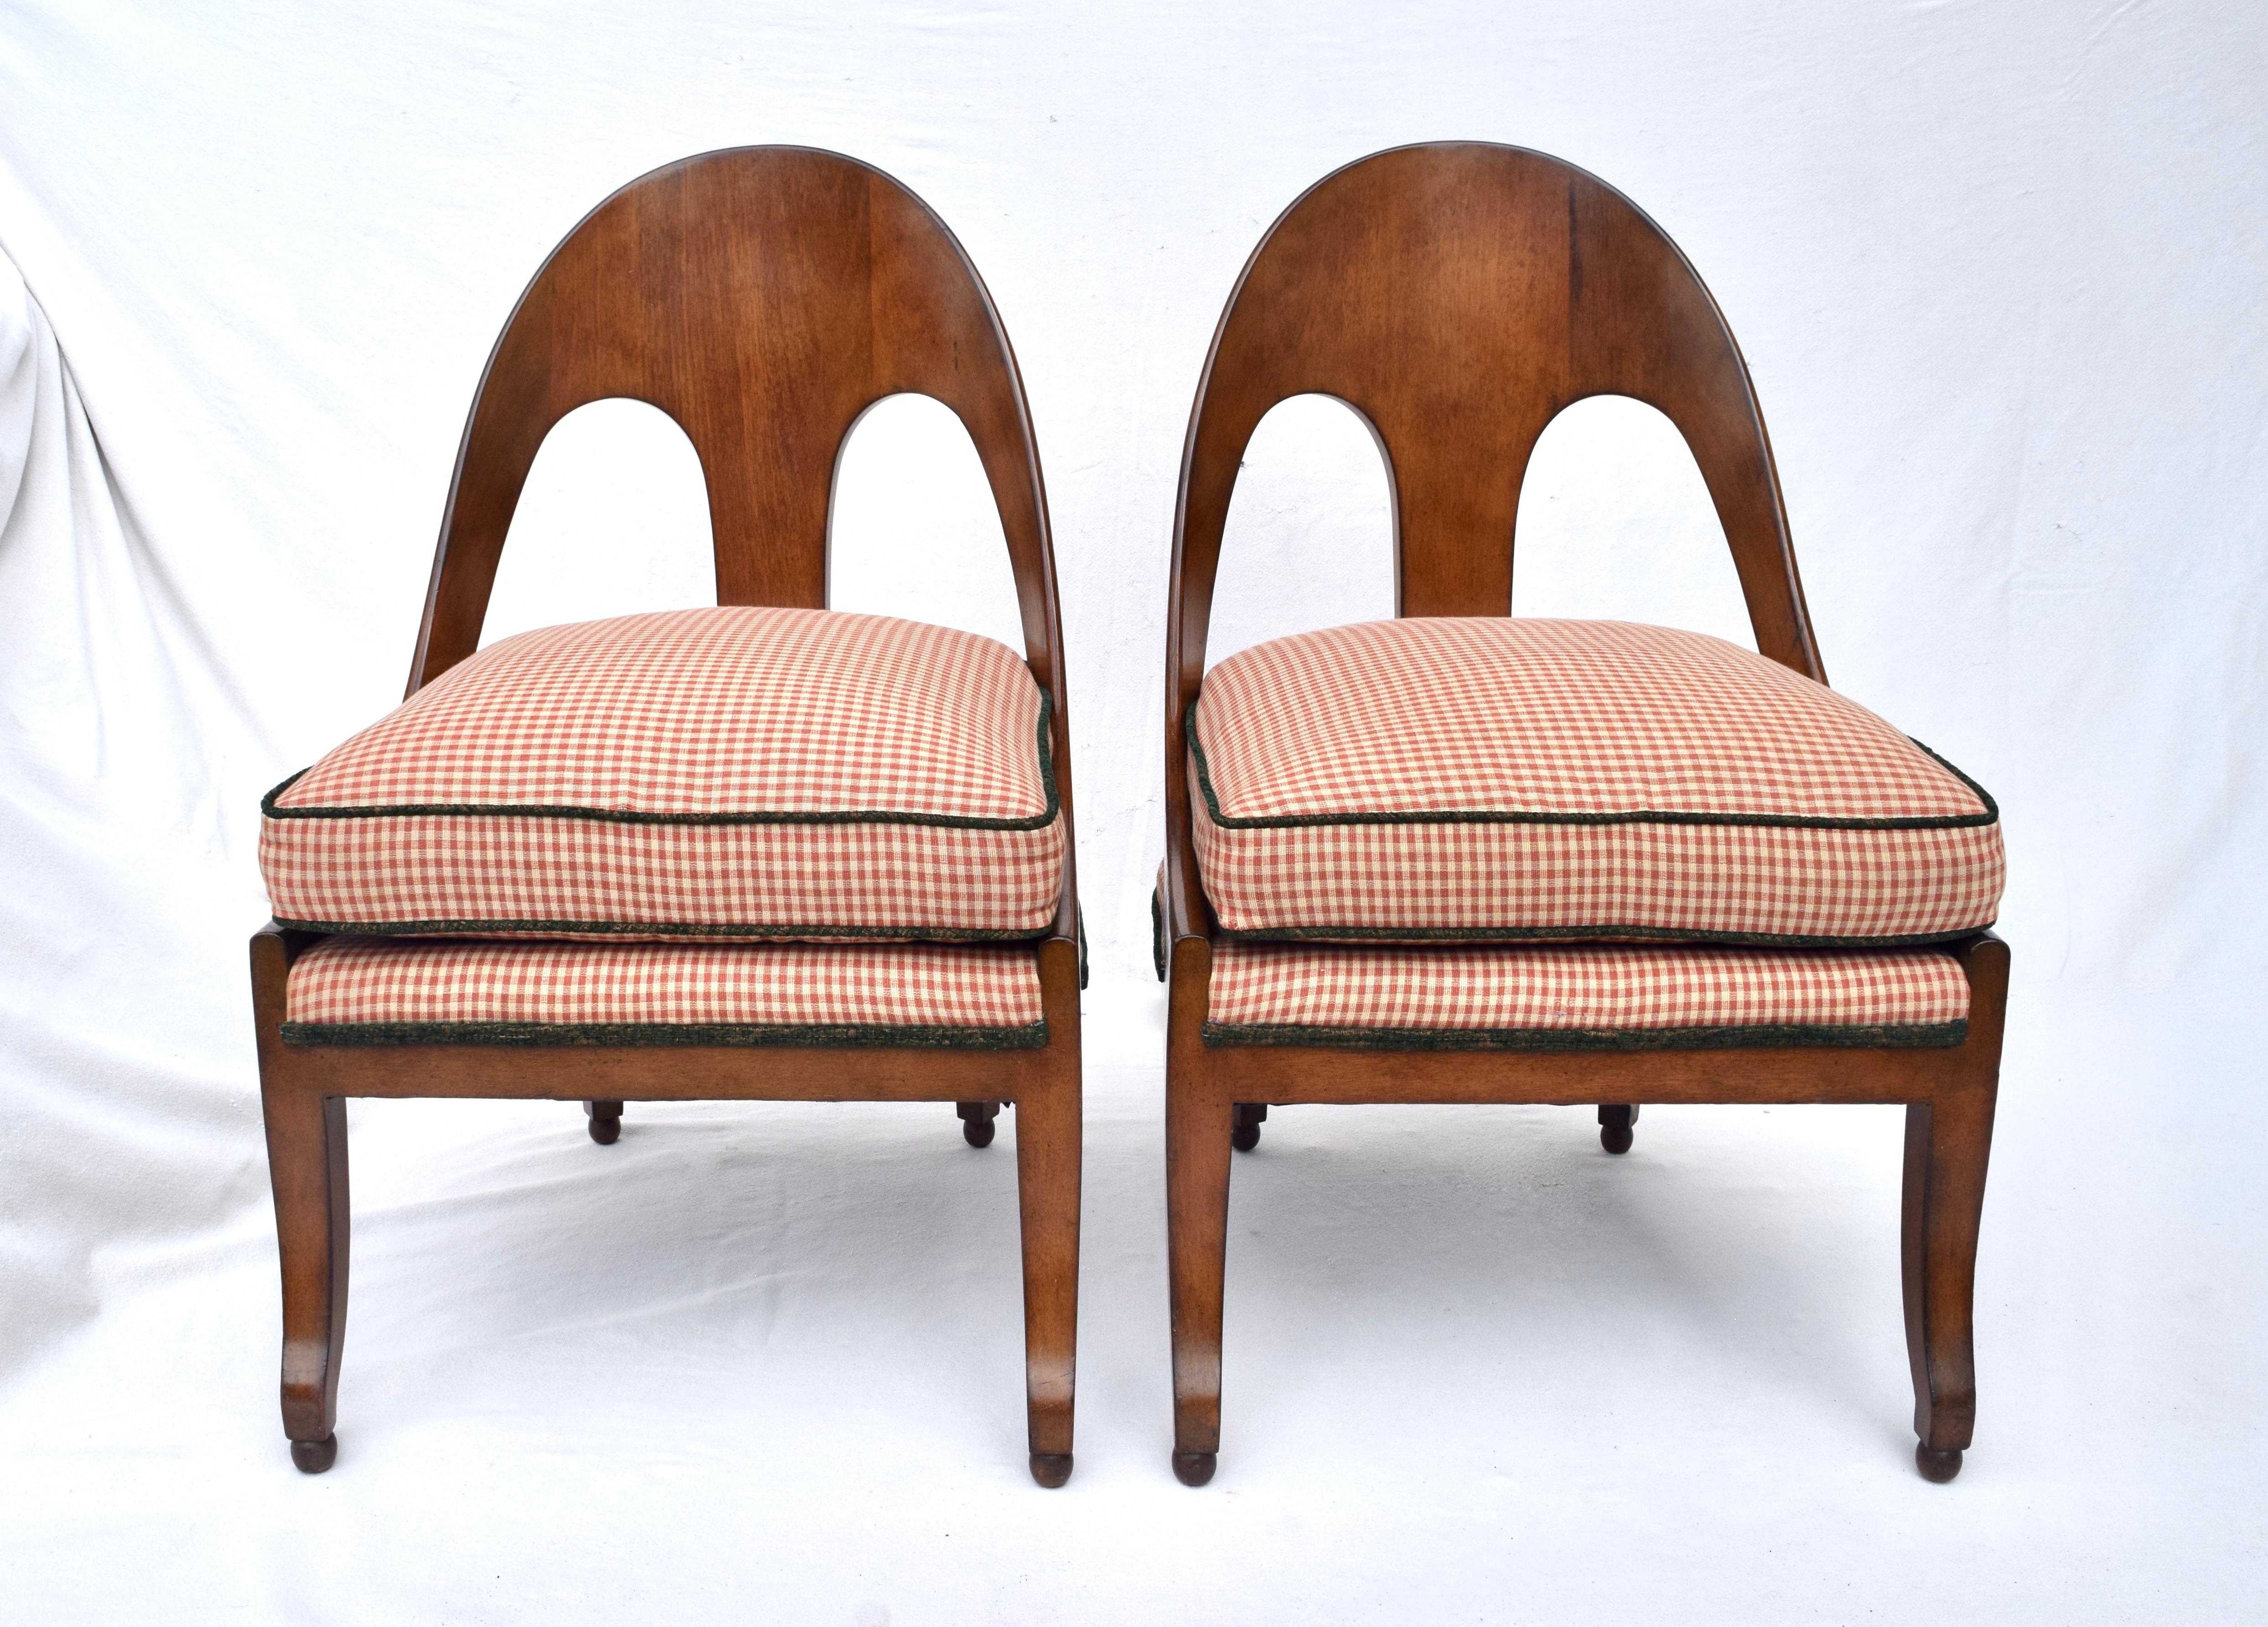 An early pair of Michael Taylor for Baker spoon chairs upholstered in red & tan windowpane cotton with dark green welt cord accents. We have modified the stationary seat design to include a single plump goose down filled cushion.